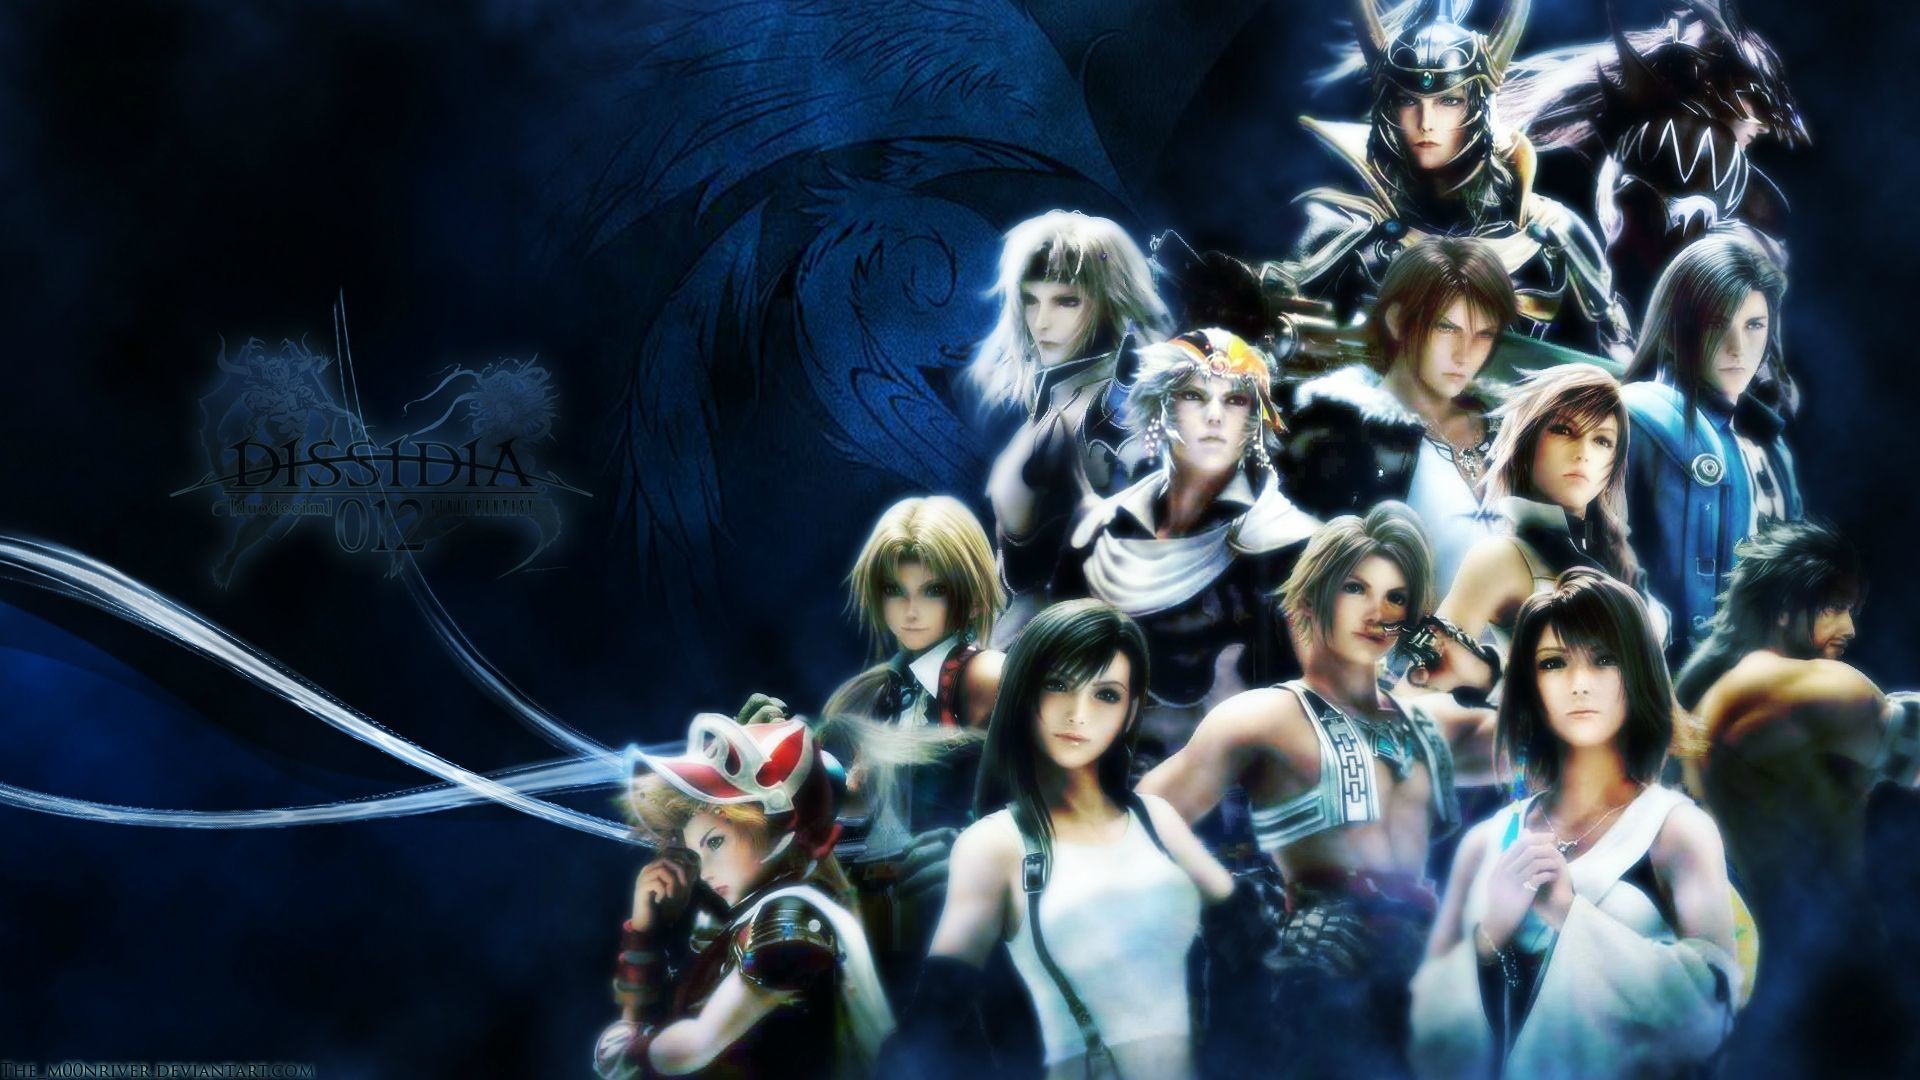 1920x1080 Video Game - Dissidia 012: Final Fantasy Warrior Of Light Kain Highwind  Cecil Harvey Squall